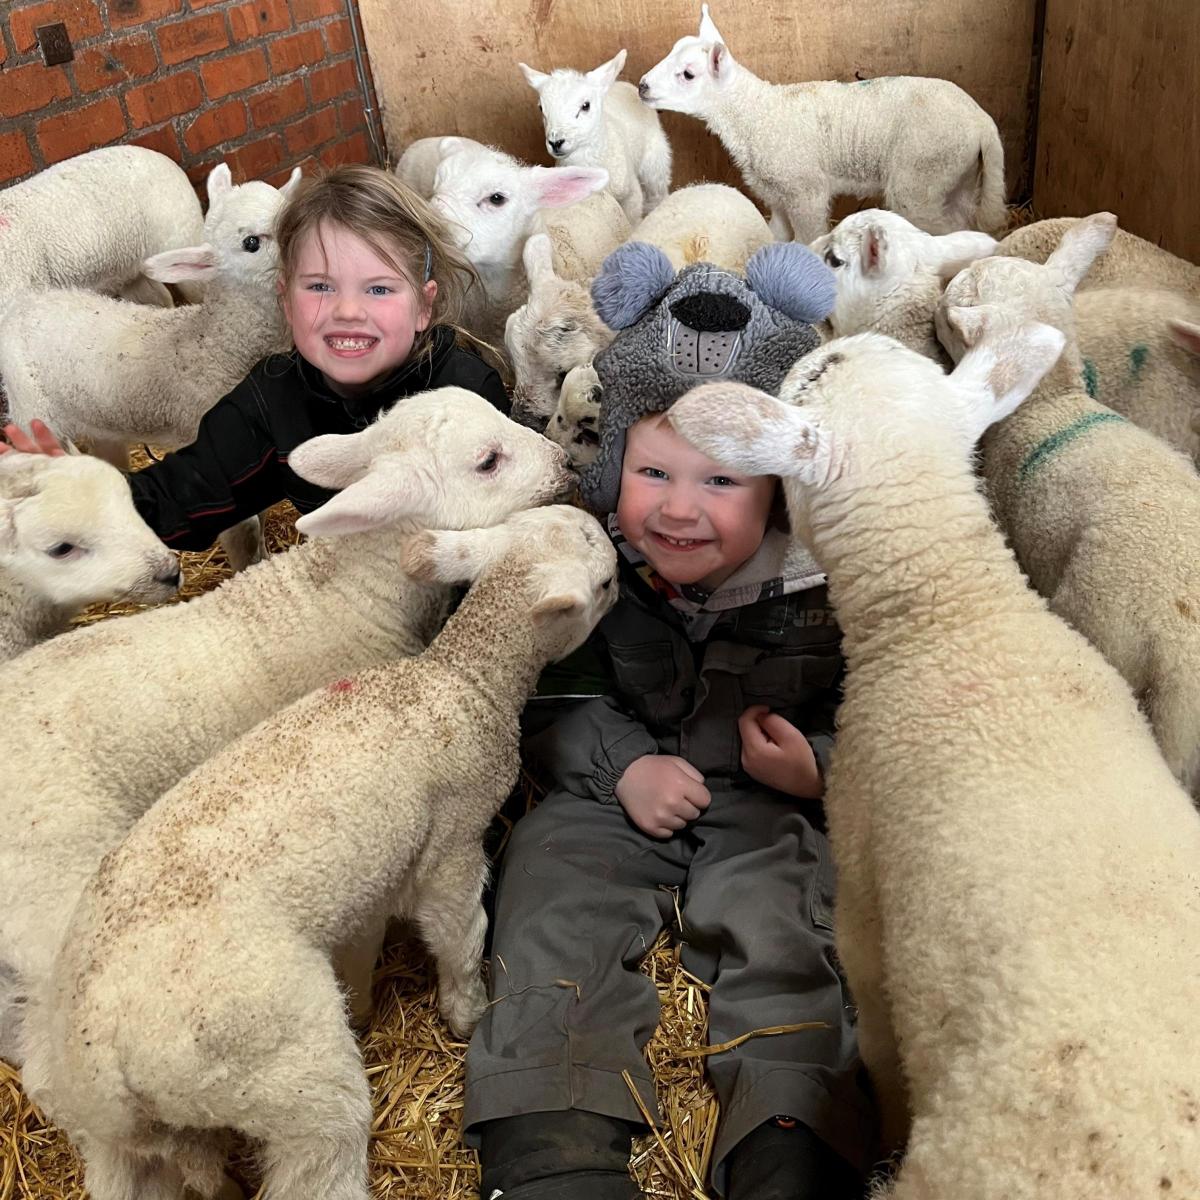 Lucy Whiteford (Hilltarvit Mains, Cupar) - Pictured are sister and brother, Jessica Whiteford (7) and Peter Whiteford (3) looking after the pet lambs, who love a cuddle